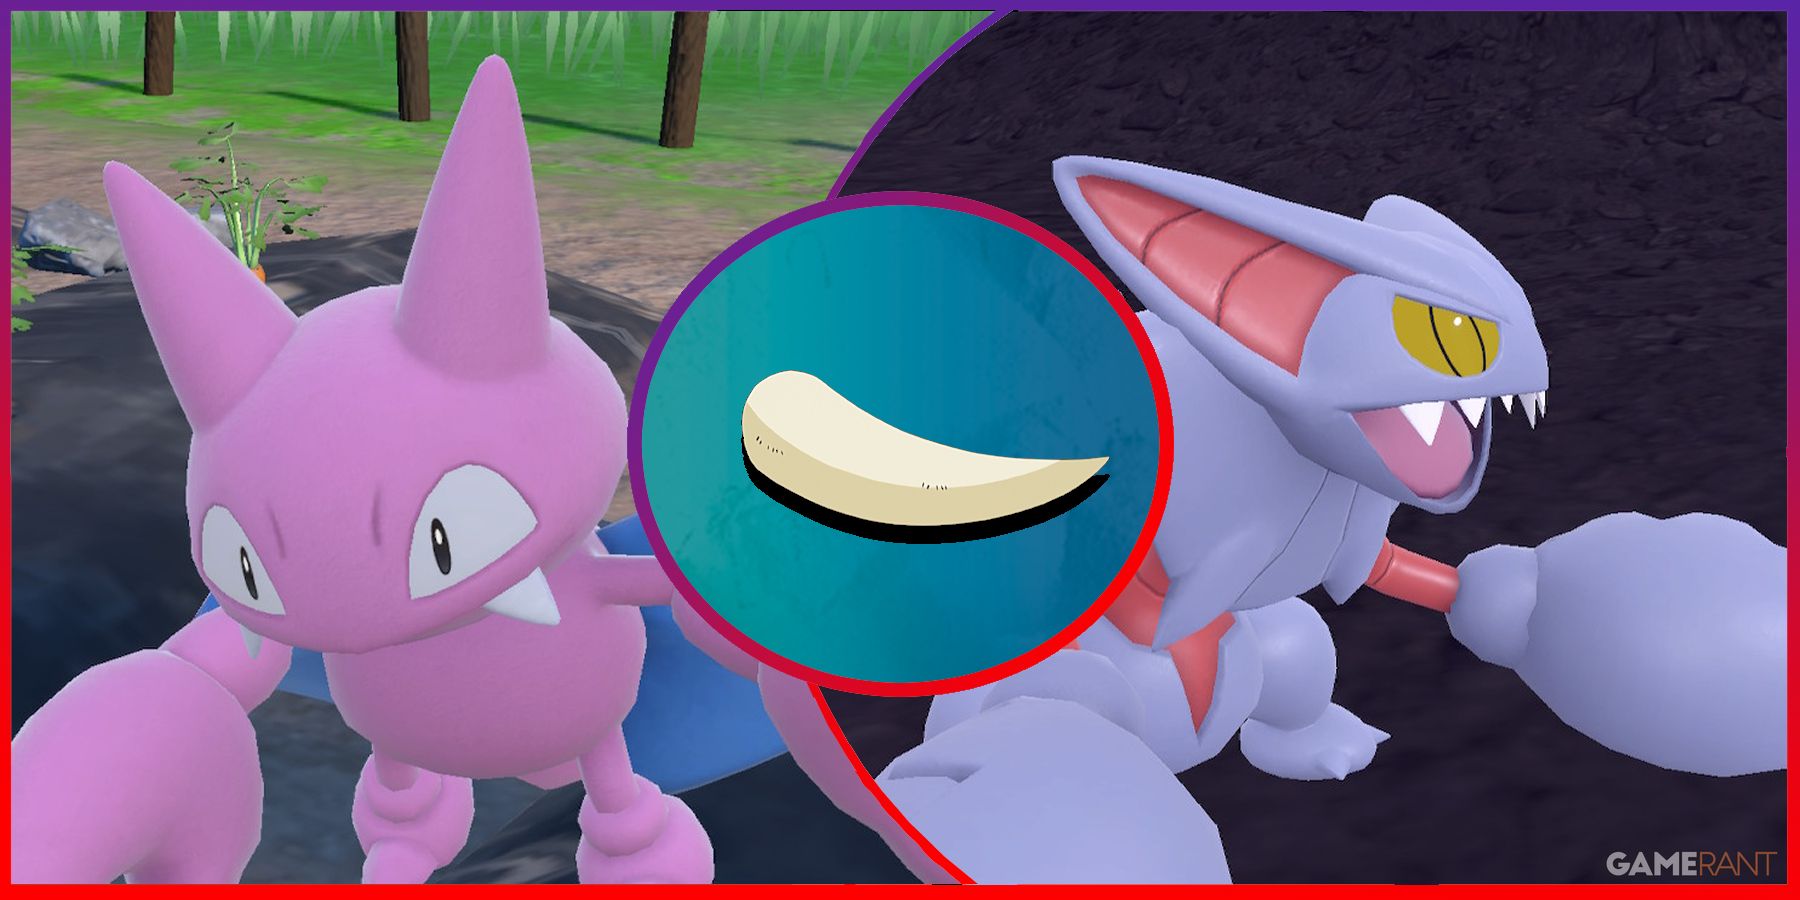 How To Evolve Gligar Into Gliscor in the Teal Mask DLC - Pokémon